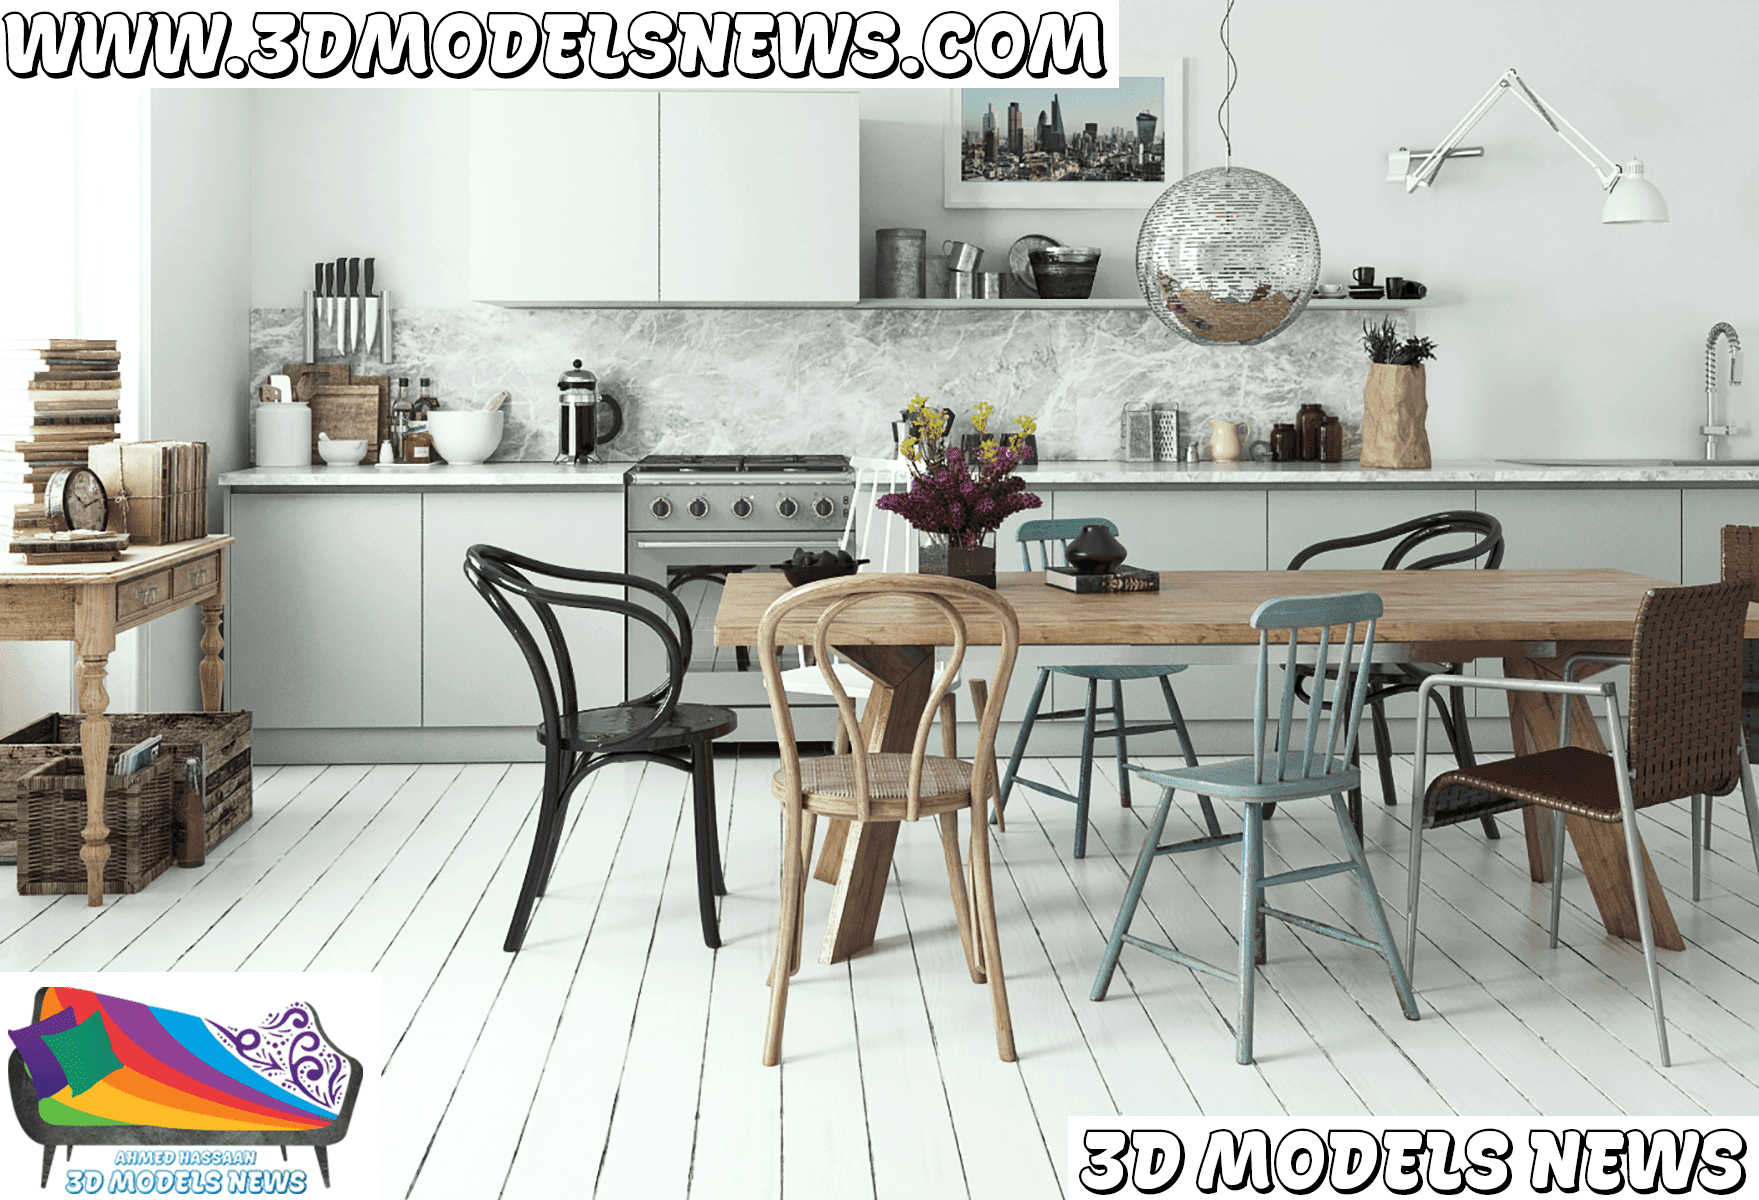 Modern kitchen scene complete with table and chairs in different shapes and colors